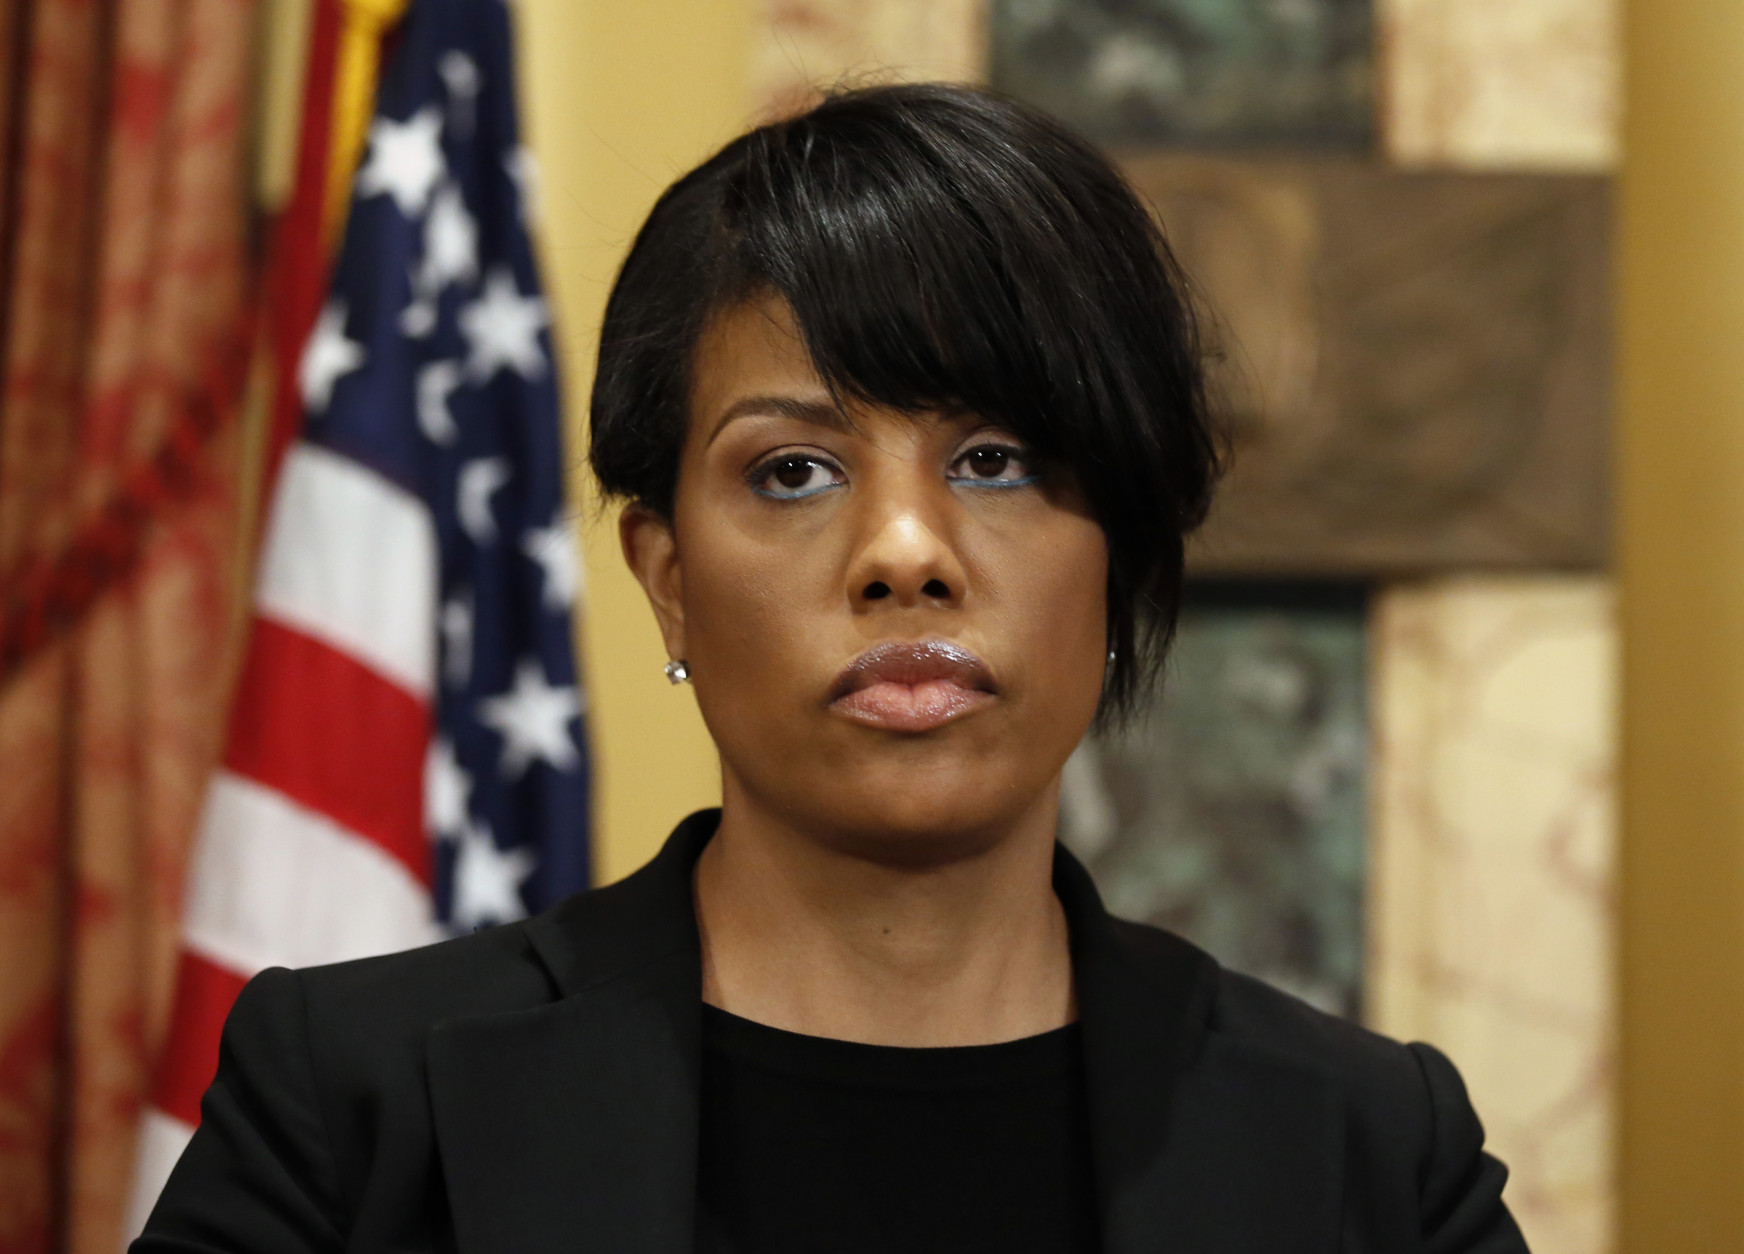 Mayor Stephanie Rawlings-Blake prepares to speak at a media availability at City Hall, Friday, May 1, 2015 in Baltimore.  Rawlings-Blake says five of six officers charged in the death of Freddie Gray are in custody. State's Attorney Marilyn J. Mosby announced criminal charges Friday against all six officers. (AP Photo/Alex Brandon)